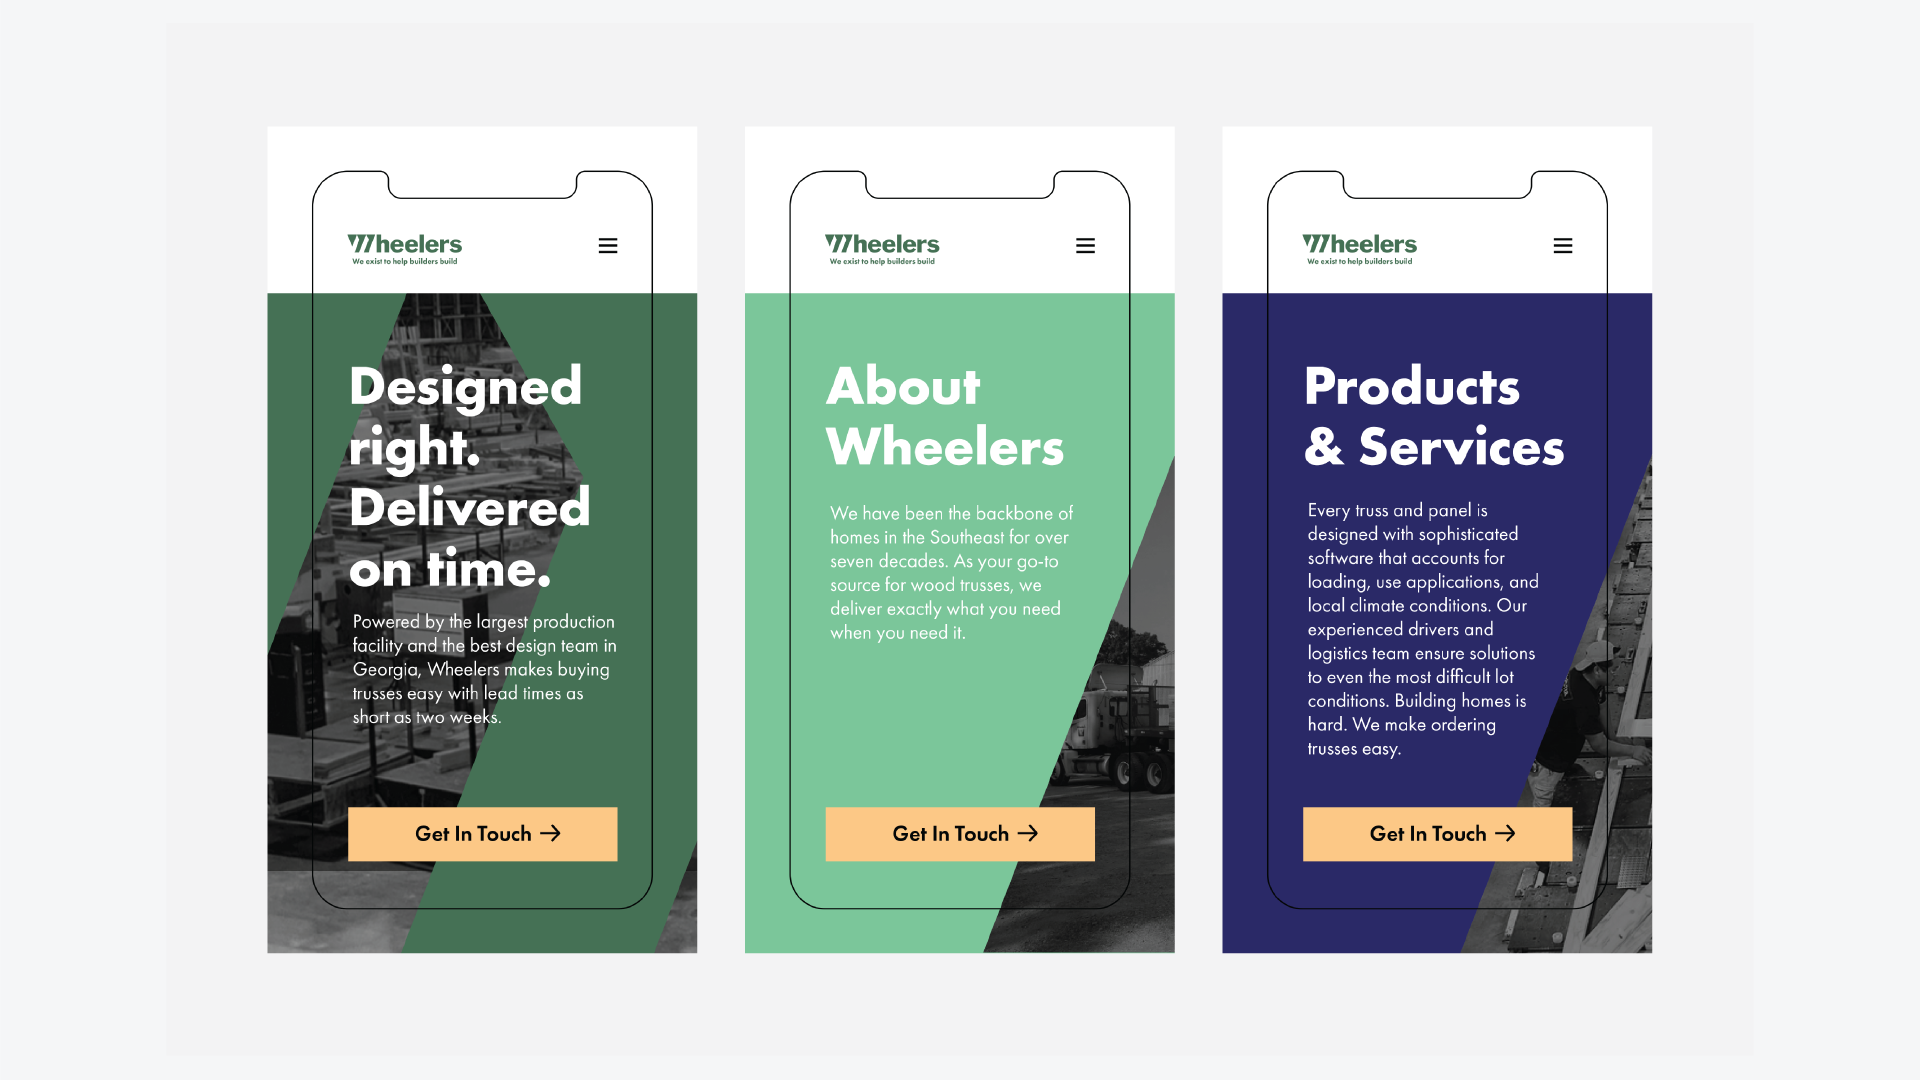 Each page on the website has a similar design but utilizes different colors. The home page is the signature dark green. The about page is a lighter green. The products page is navy blue. All pages feature images of the Wheelers plant in the background.